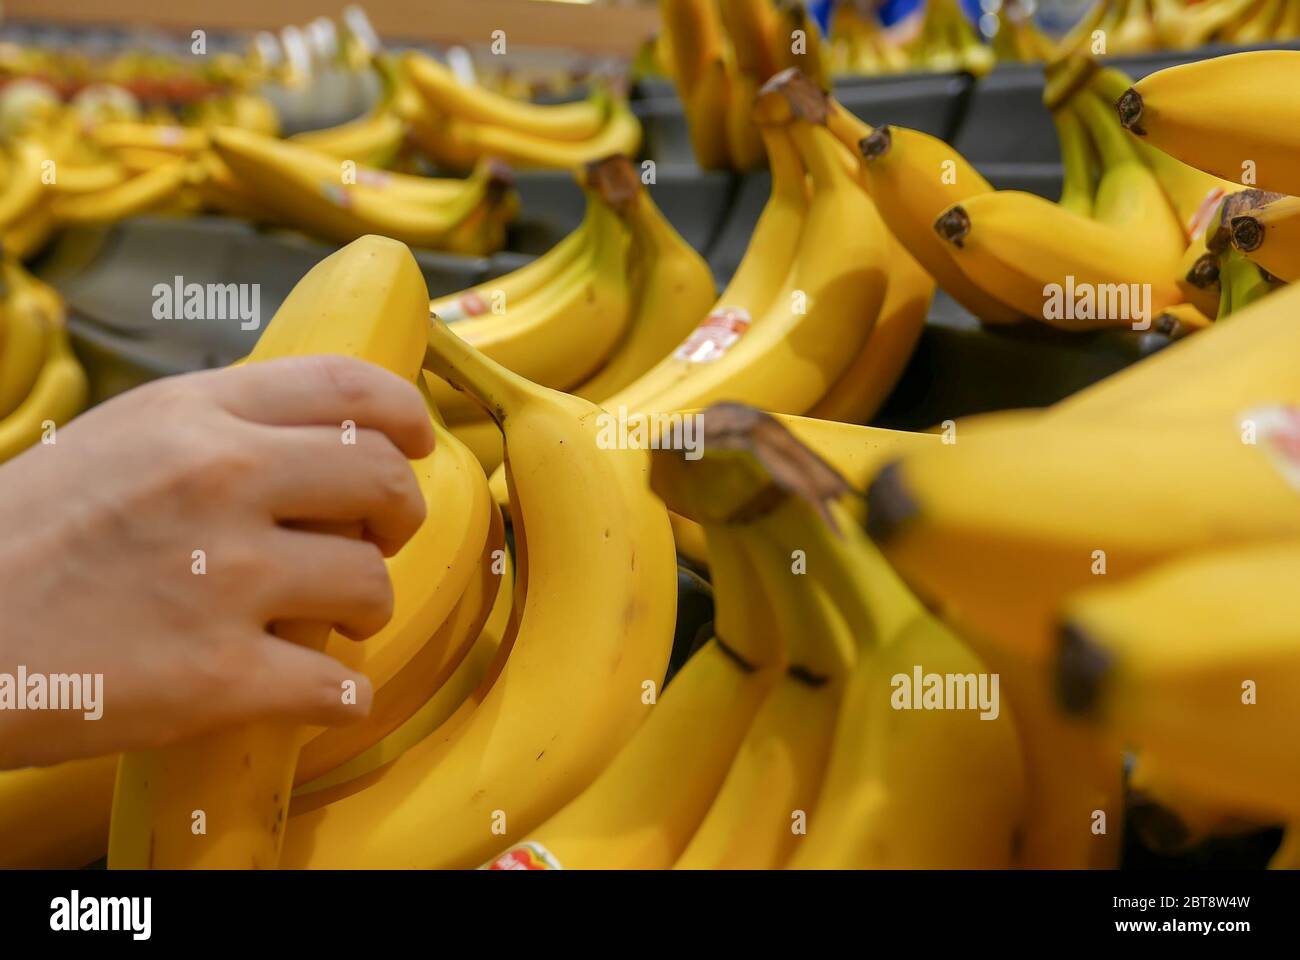 Motion of woman's hand picking bananas inside superstore Stock Photo